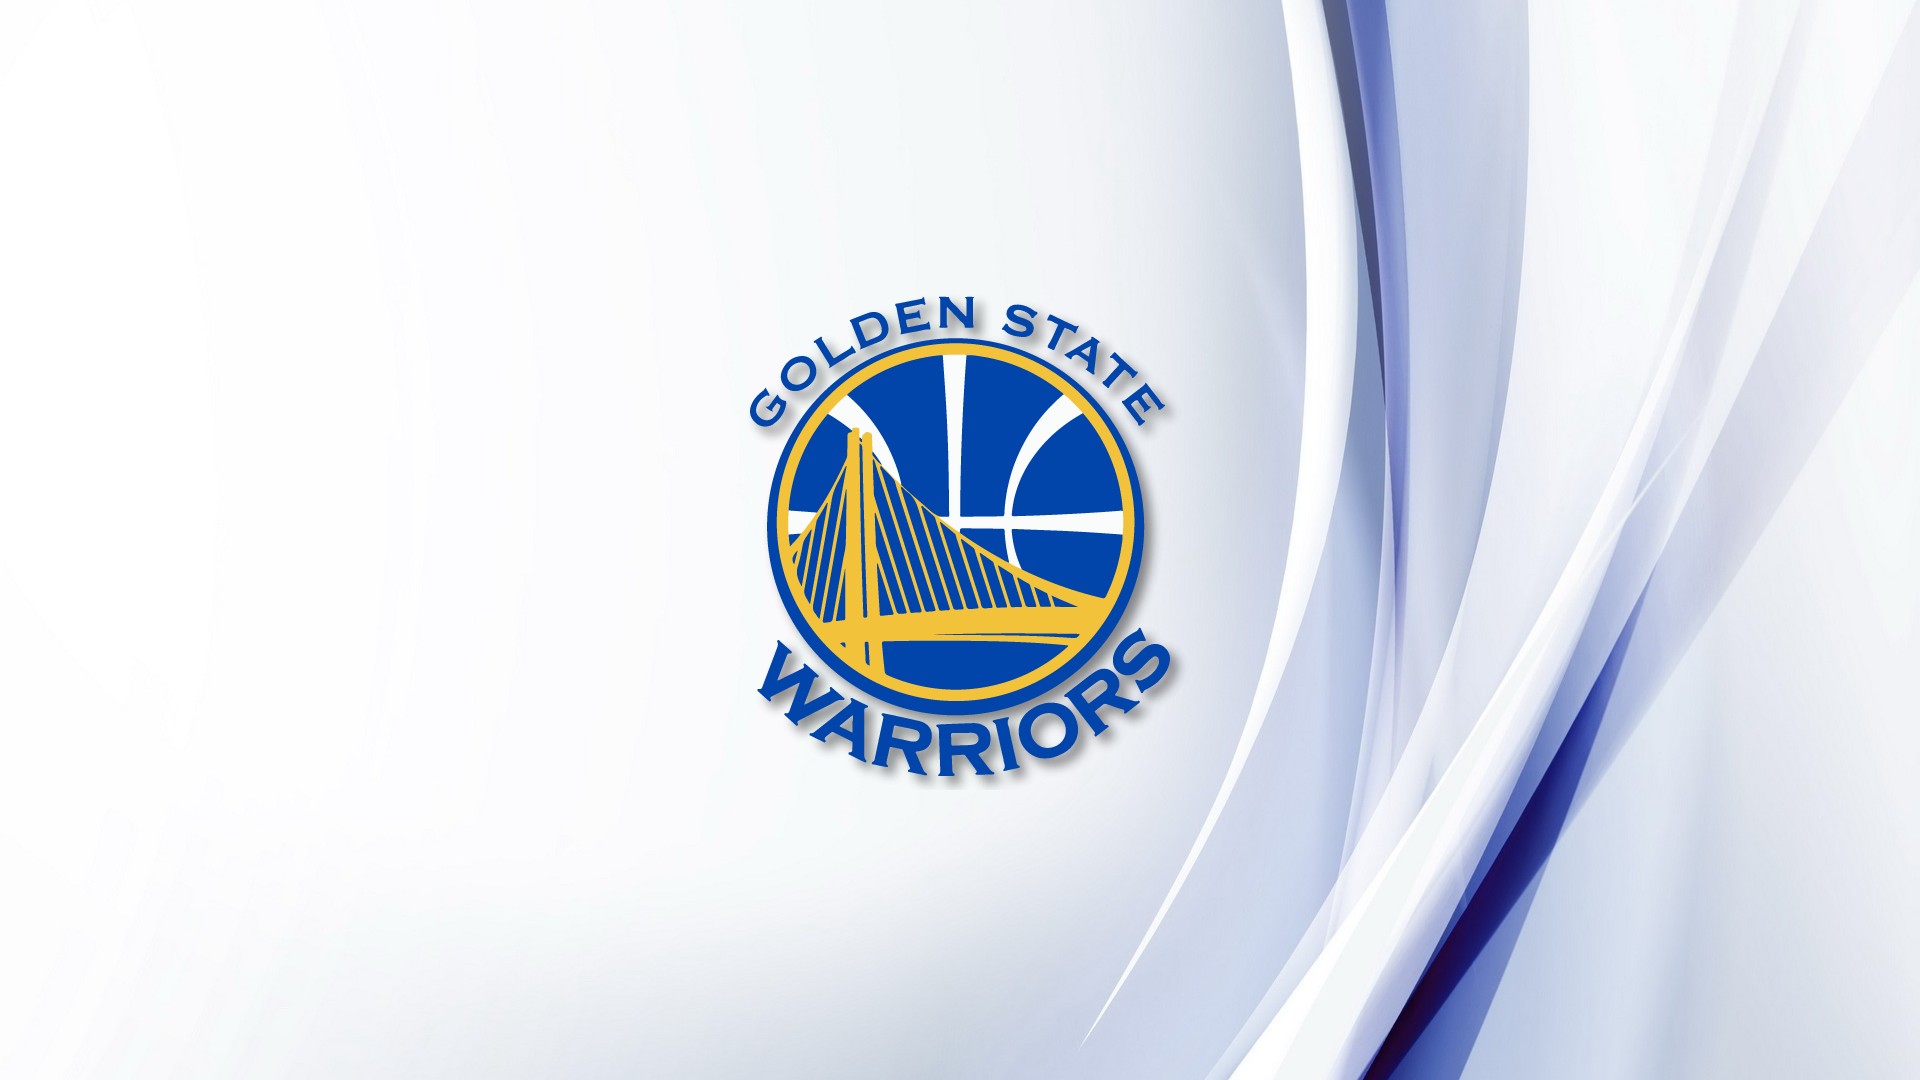 Golden State Warriors Wallpaper For Desktop with image resolution 1920x1080 pixel. You can use this wallpaper as background for your desktop Computer Screensavers, Android or iPhone smartphones